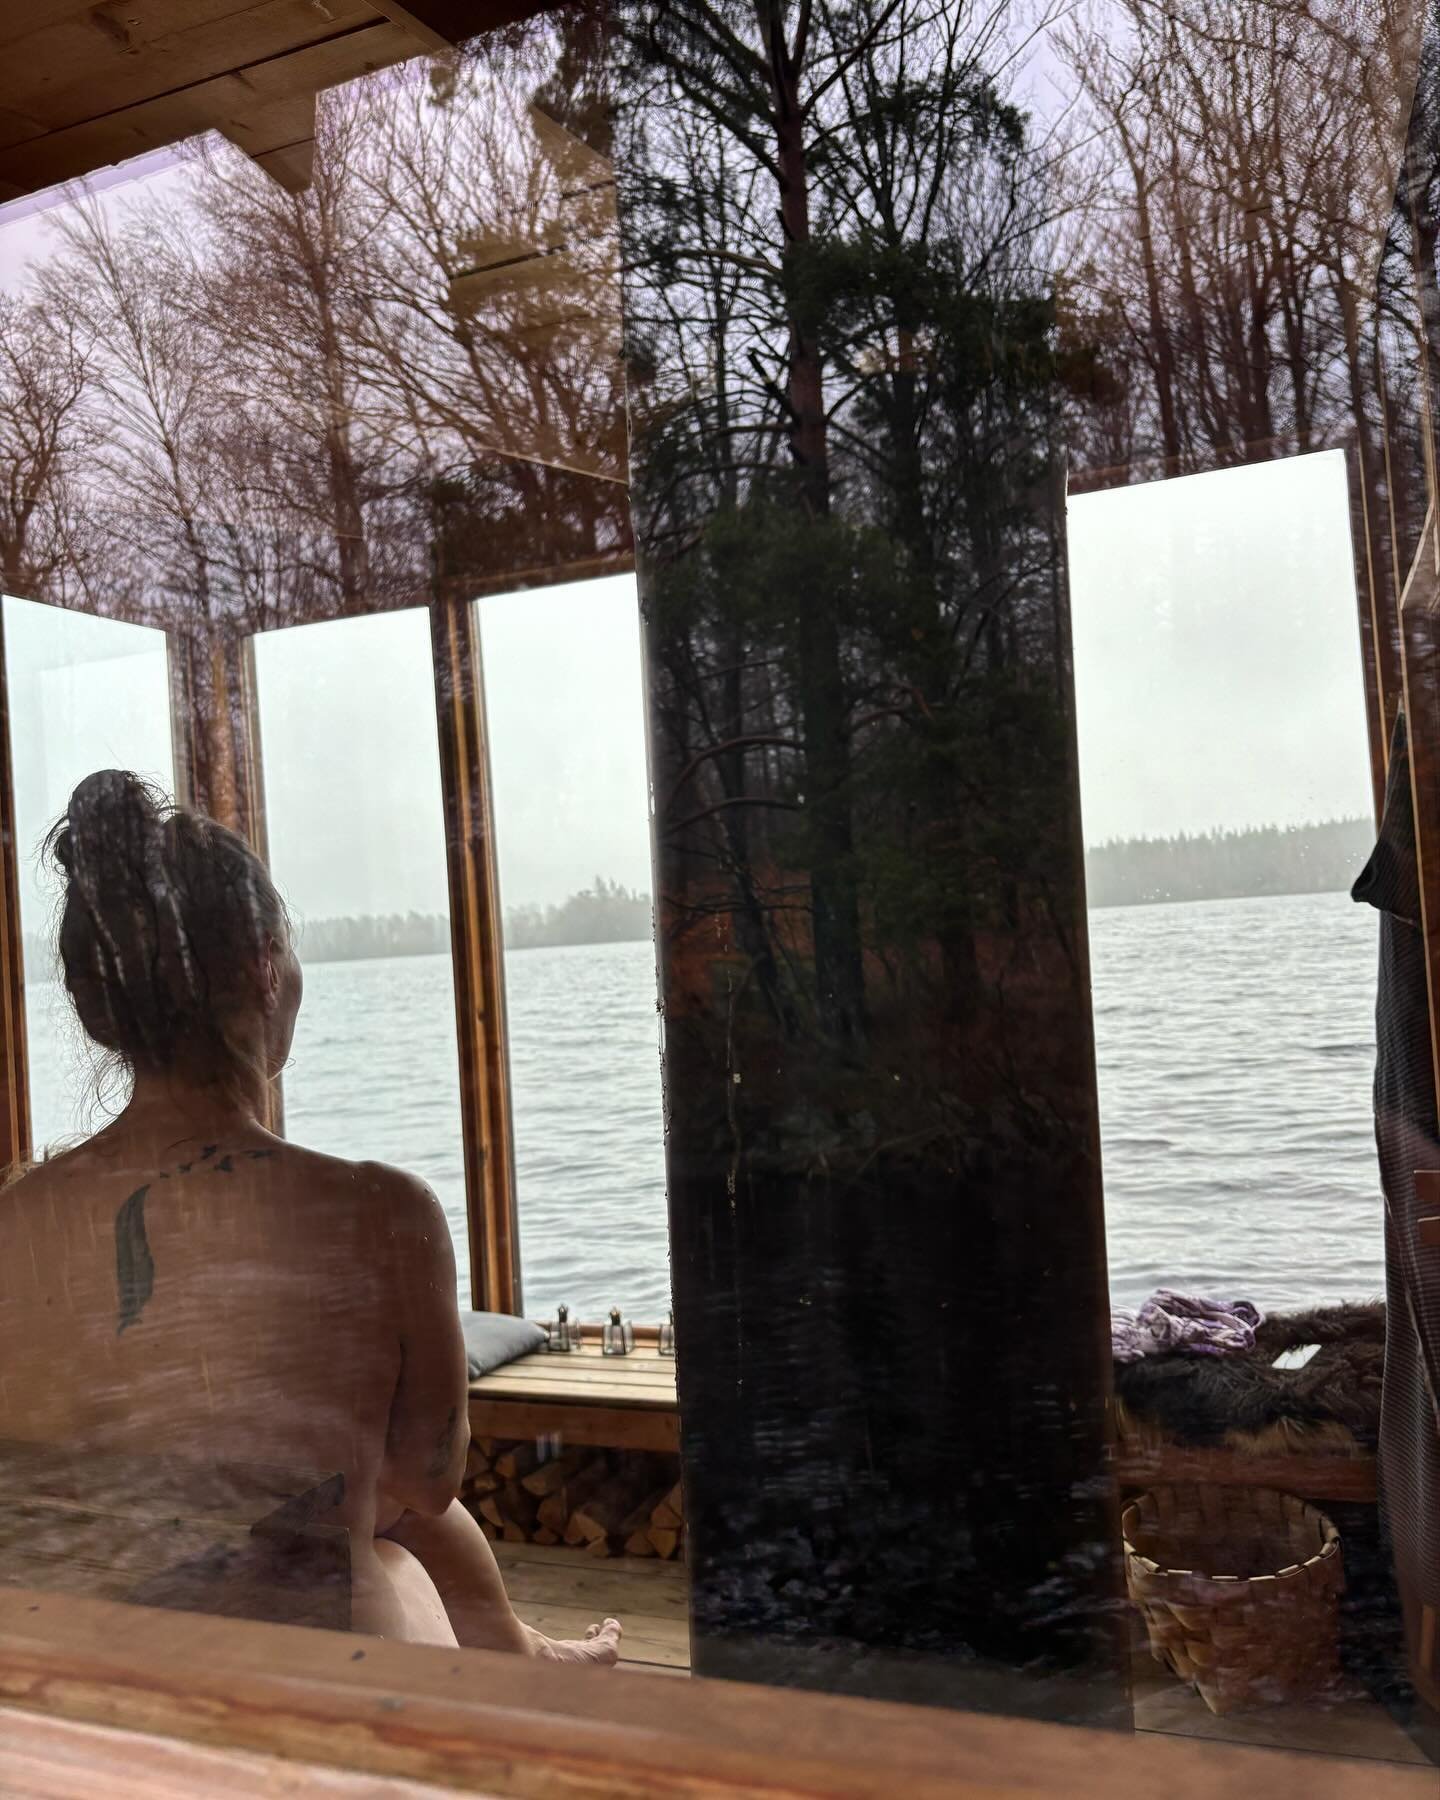 When you can&rsquo;t join your story buds in Manchester at @akuastorytelling &lsquo;s :( . 

A day away with your long time pals in a cabin is the remedy. Sauna at @stedsansfarmrestaurant , zero reception, a dip in a cold lake, drinks, Finnish Music 